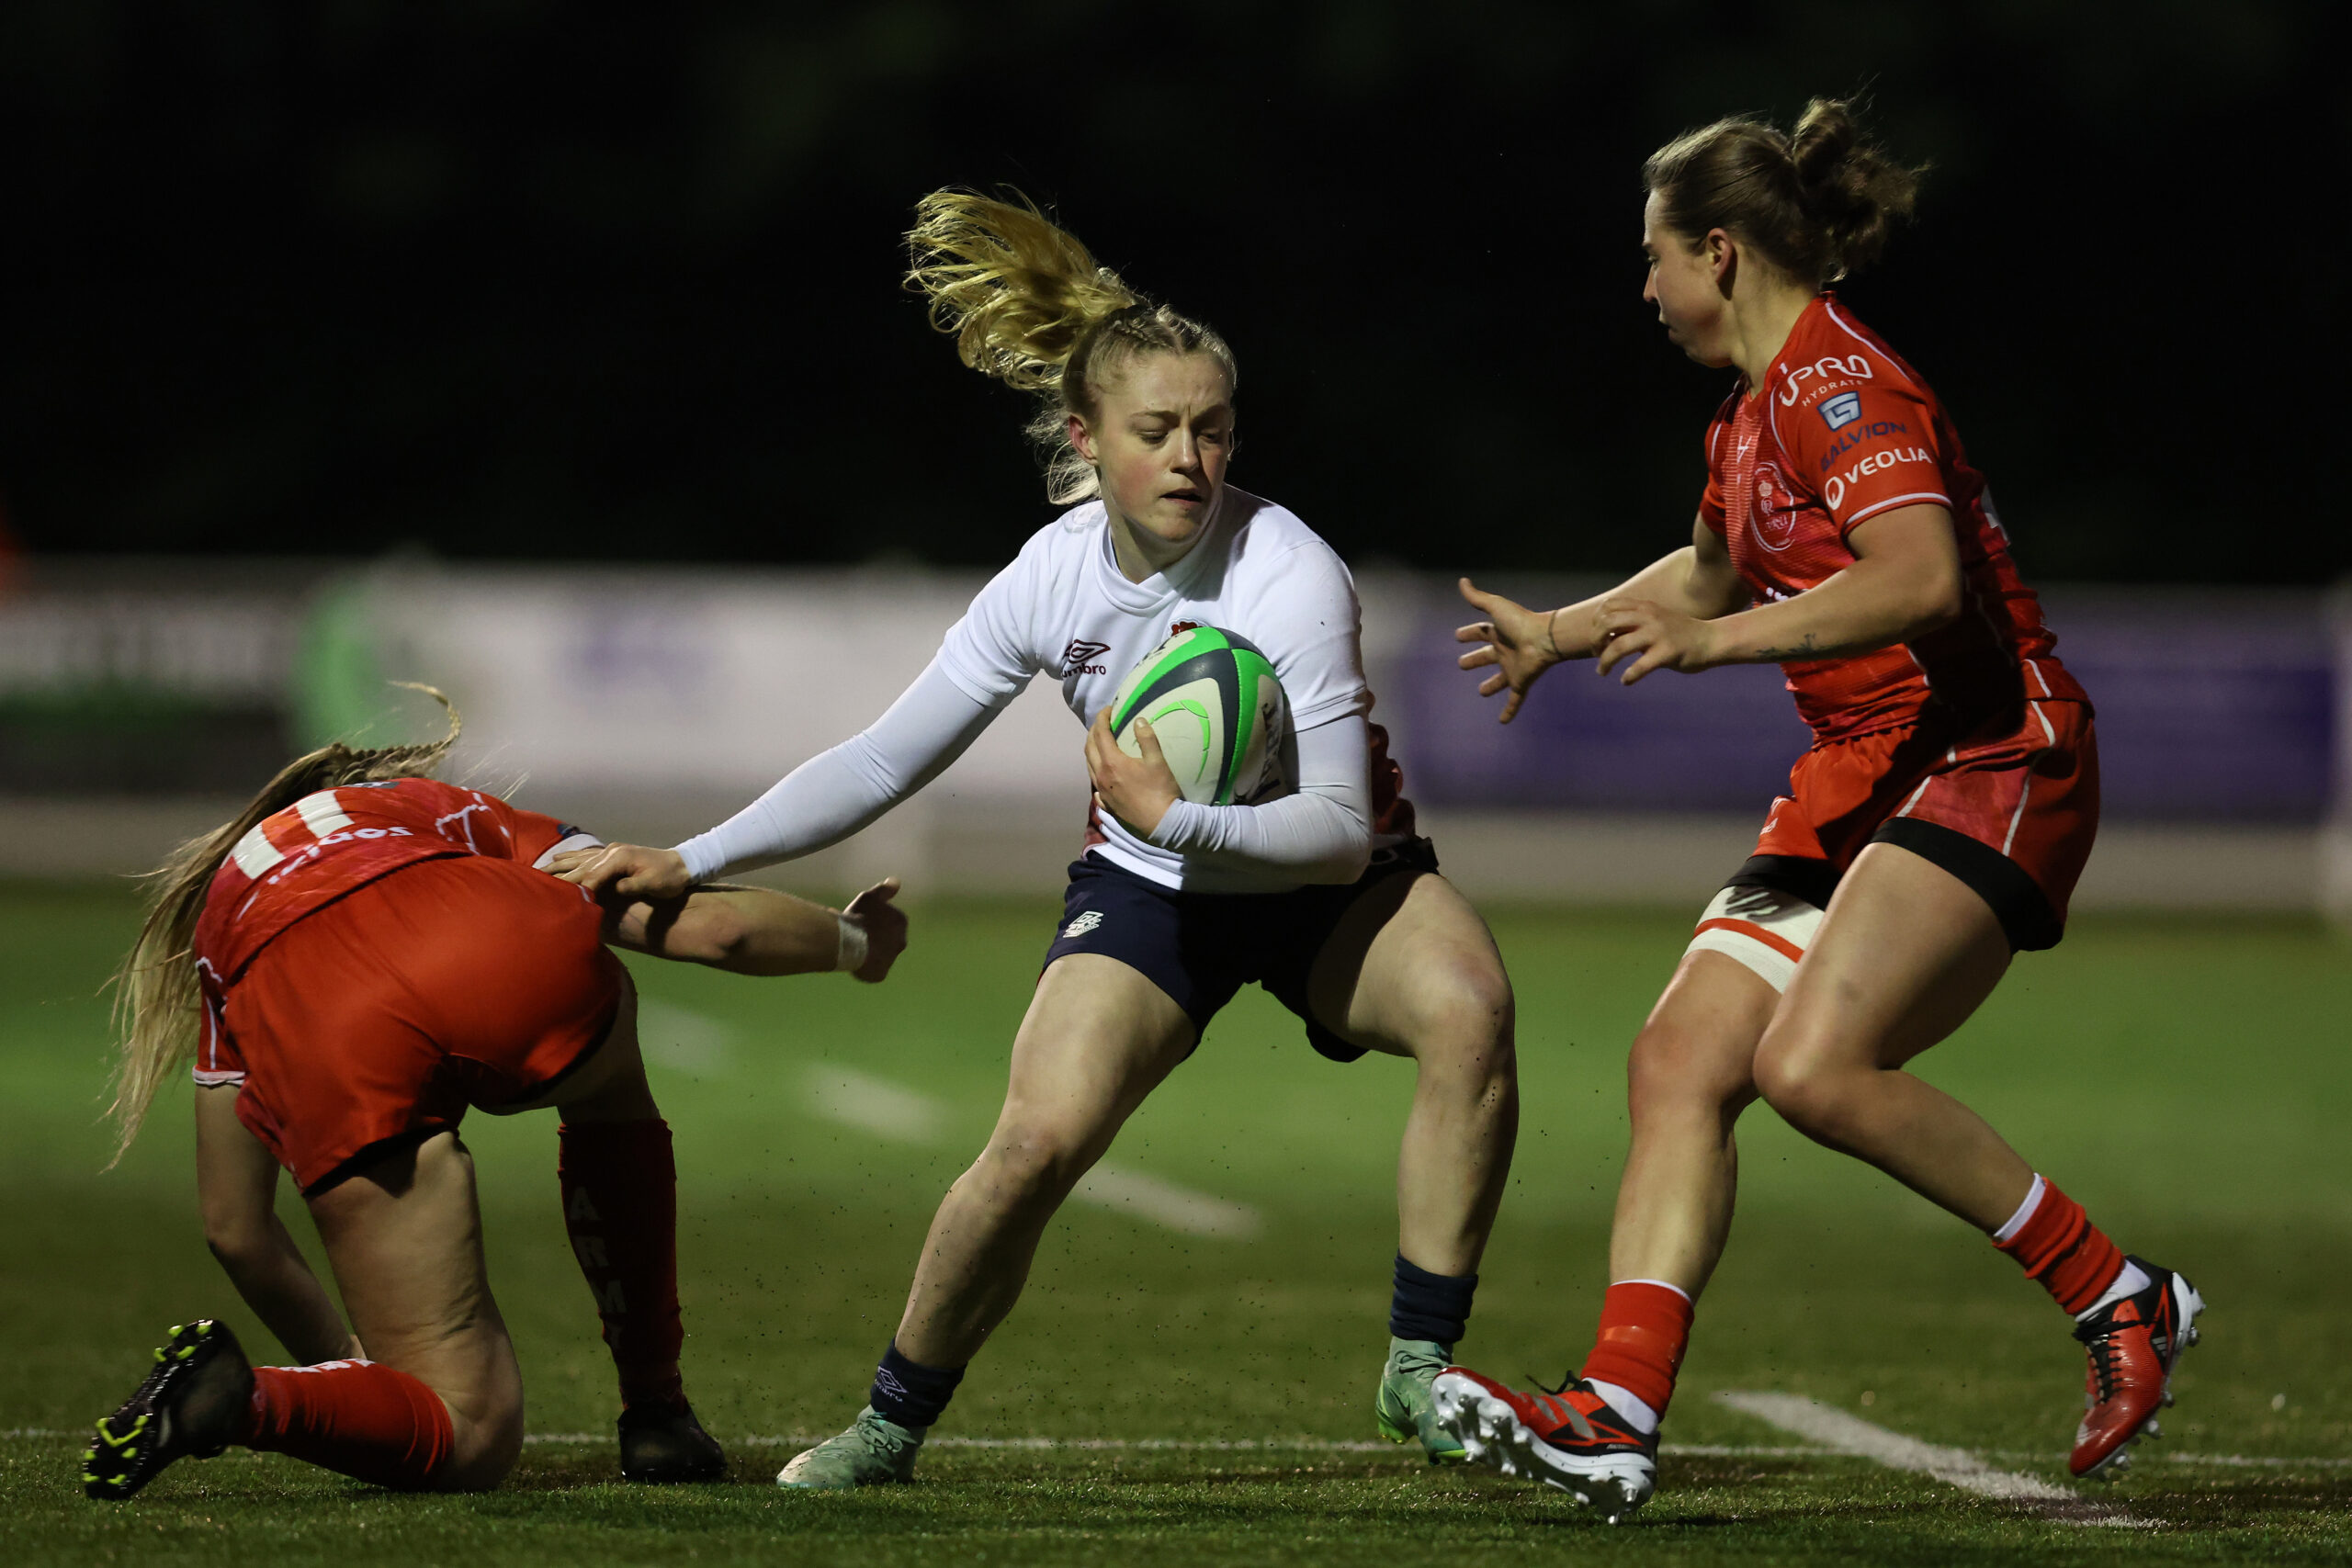 Millie David of England Rugby Women's U20 team in action against the British Army